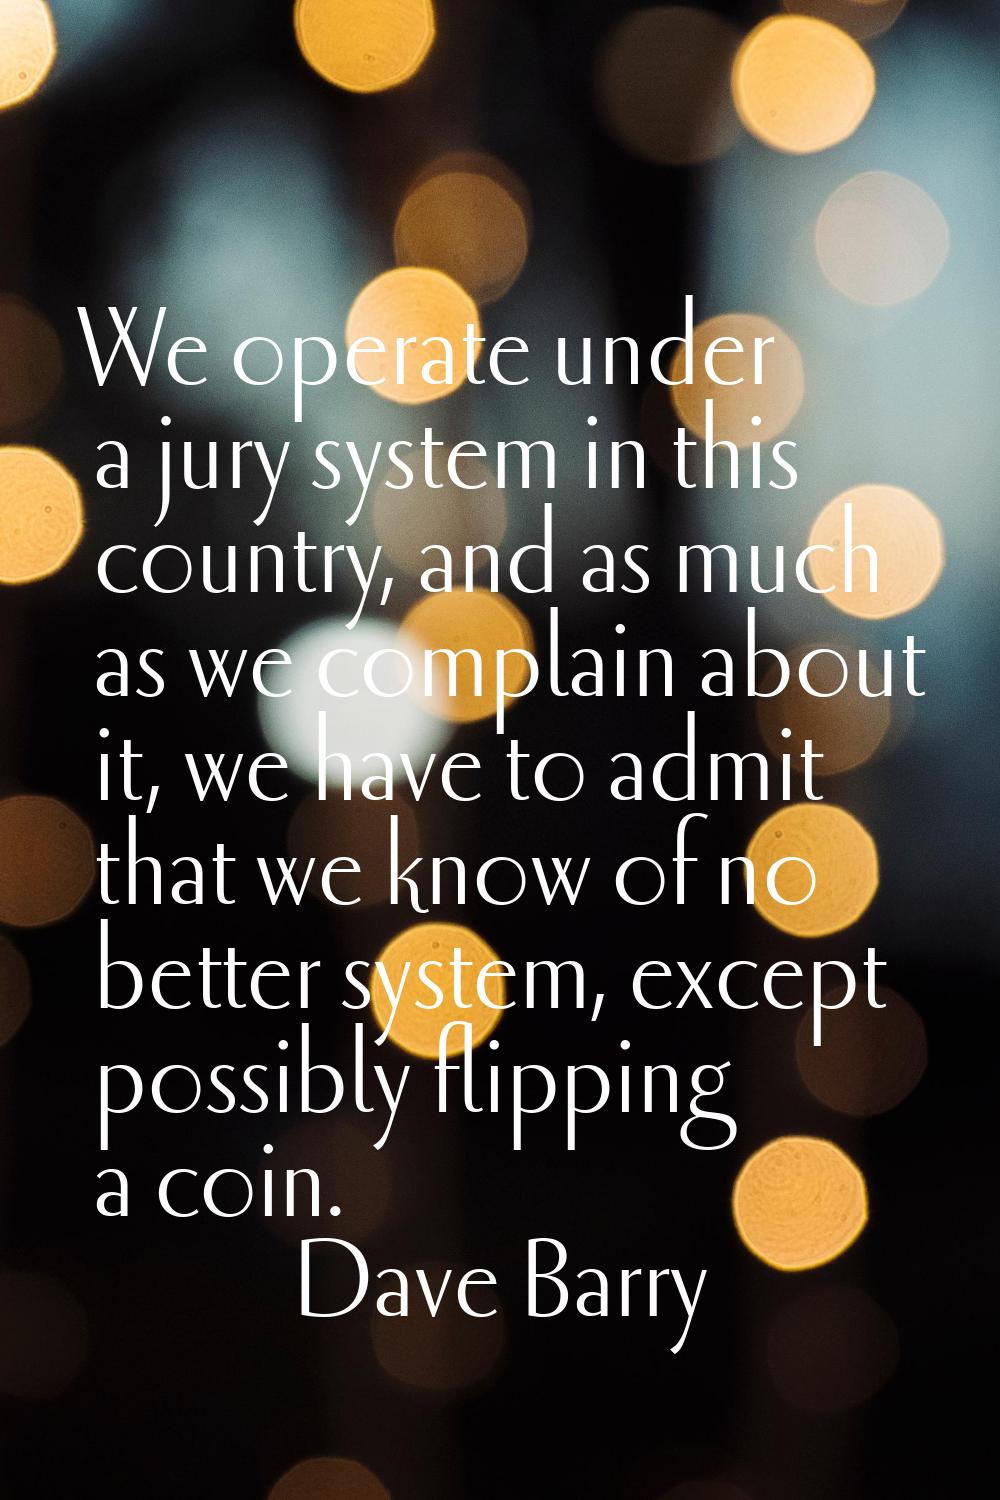 We operate under a jury system in this country, and as much as we complain about it, we have to adm